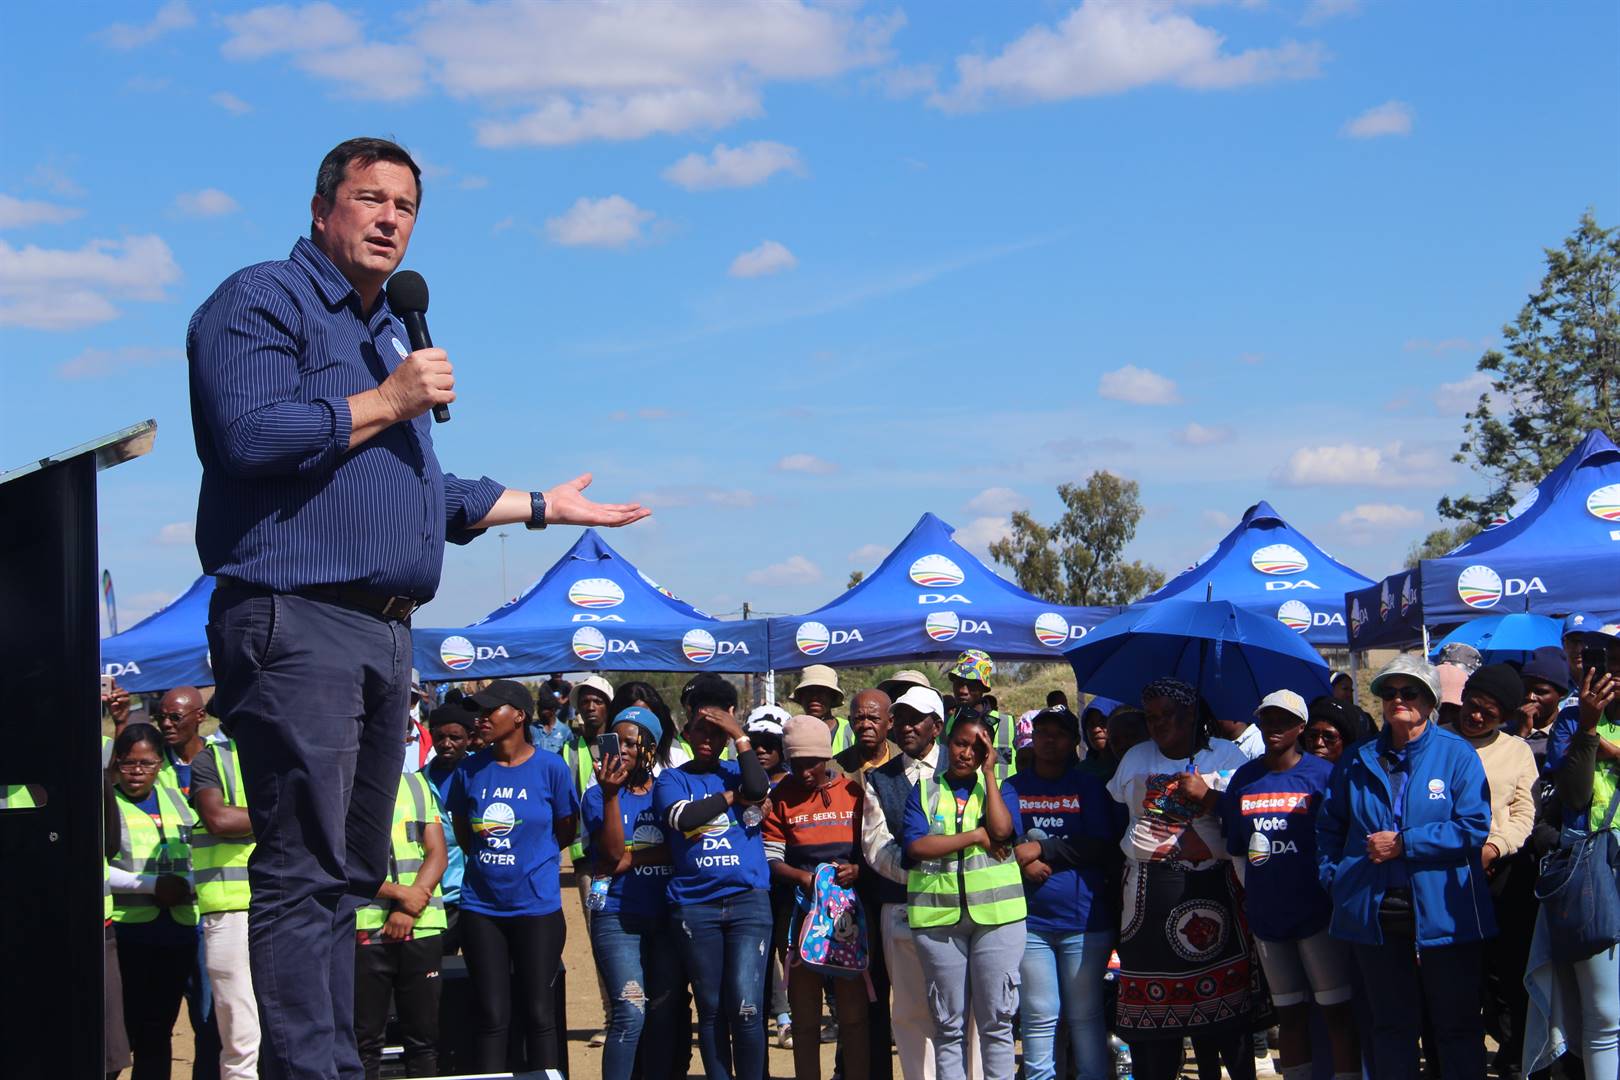 John Steenhuisen talking to residents of Thaba Nchu to announce the DA’s manifest for the national and provincial election on 29 May.Photo: Lientjie Mentz